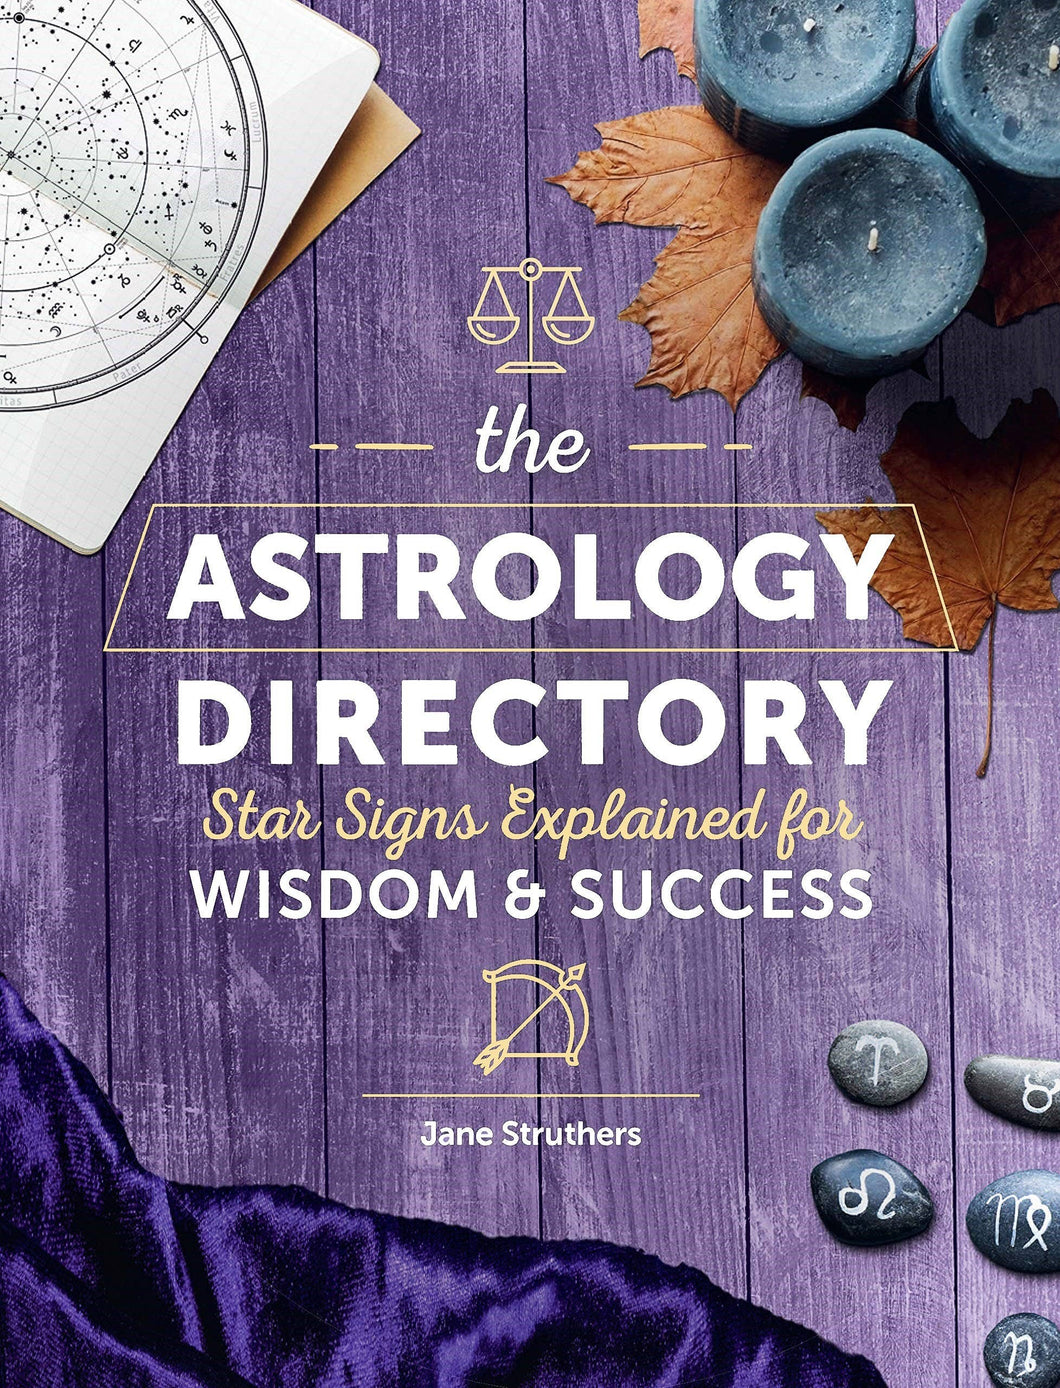 Microcosm Publishing & Distribution - Astrology Directory: Star Signs Explained for Wisdom